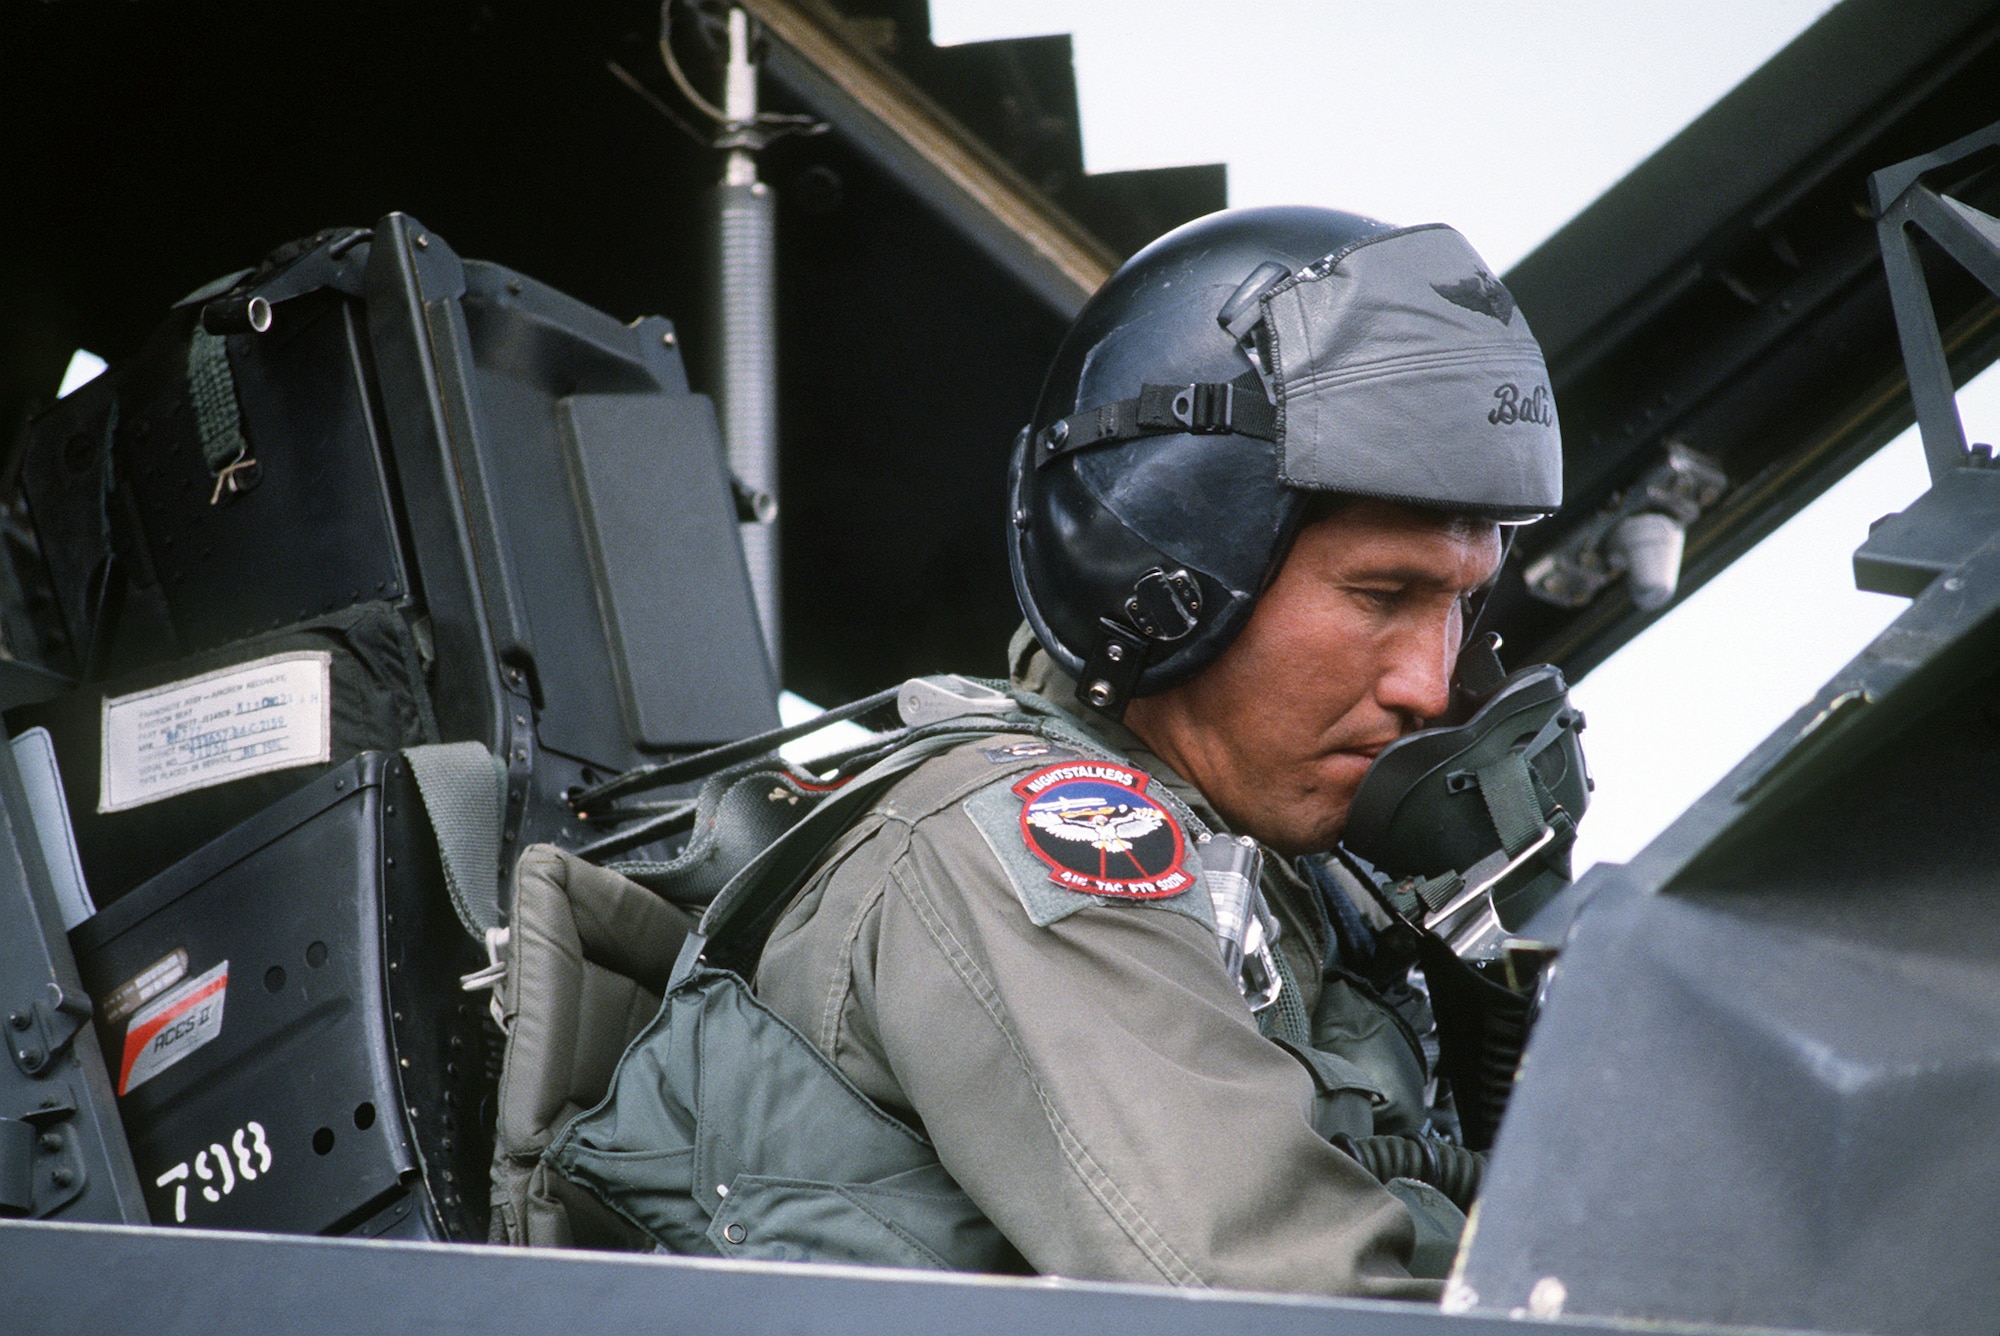 U.S. Air Force Maj. Joe Bowley, a pilot with the 37th Tactical Fighter Wing sits in the cockpit of a U.S. Air Force F-117A Nighthawk stealth fighter aircraft while getting ready for the flight home after Operation Desert Storm. The attacks during Operation Desert Storm neutralized over 700 Iraqi combat aircraft and heavily damaged critical military support networks including command and control centers, communications and intelligence capabilities, integrated air defenses and power generation centers. (U.S. Air Force Courtesy Photo)